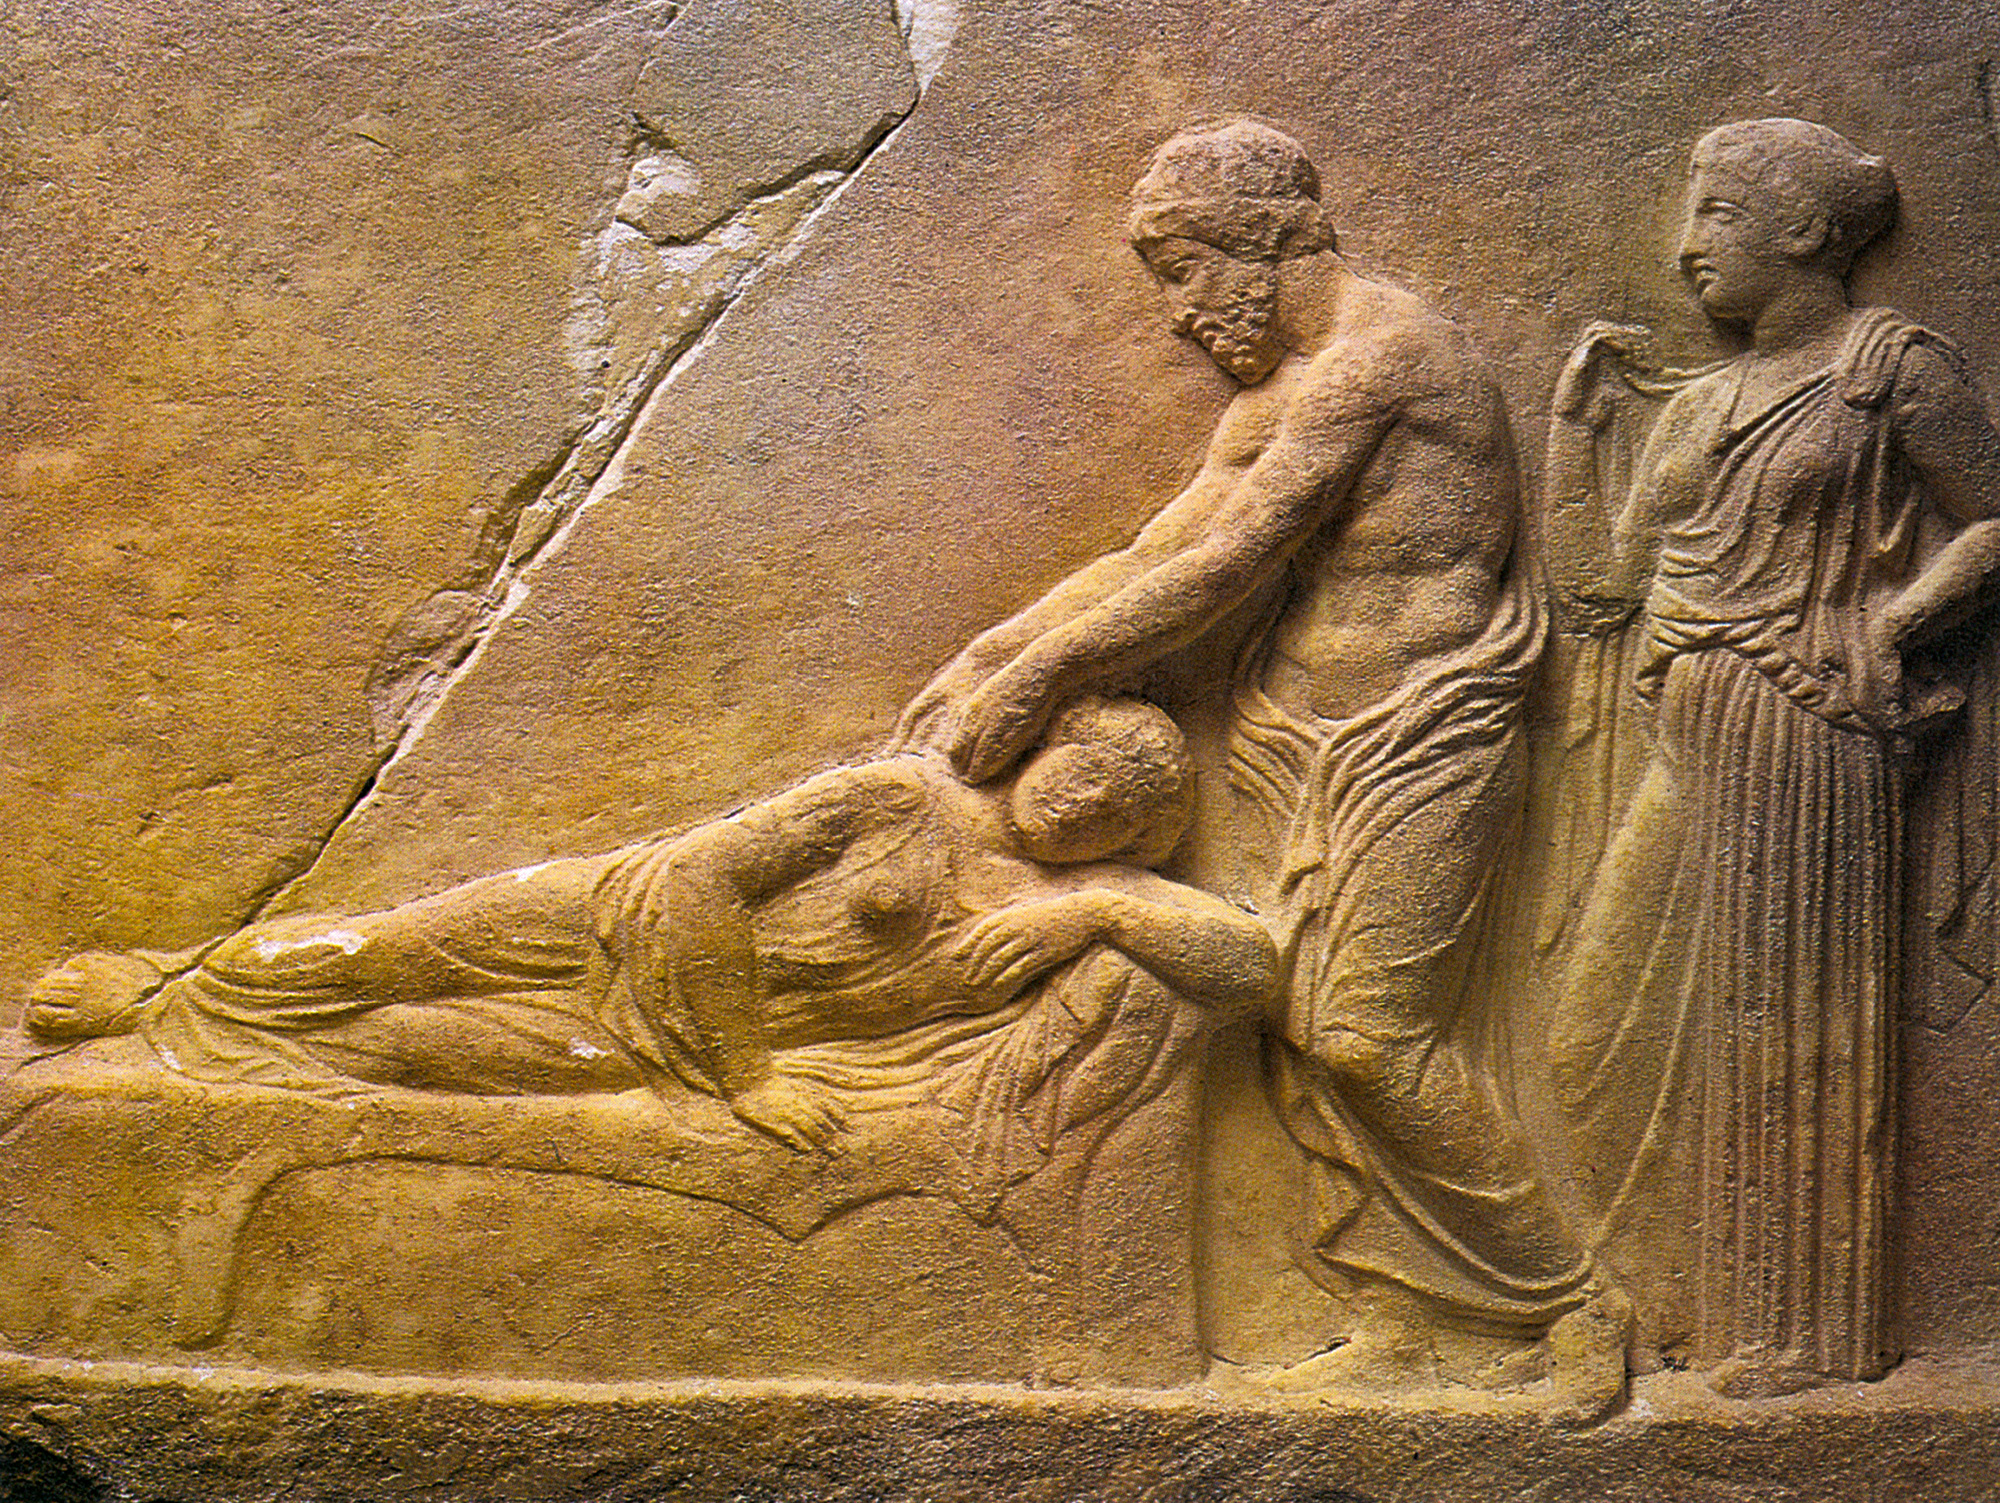 Relief votive of Asclepius and Hygieia tending to a sick woman, fourth century BCE.